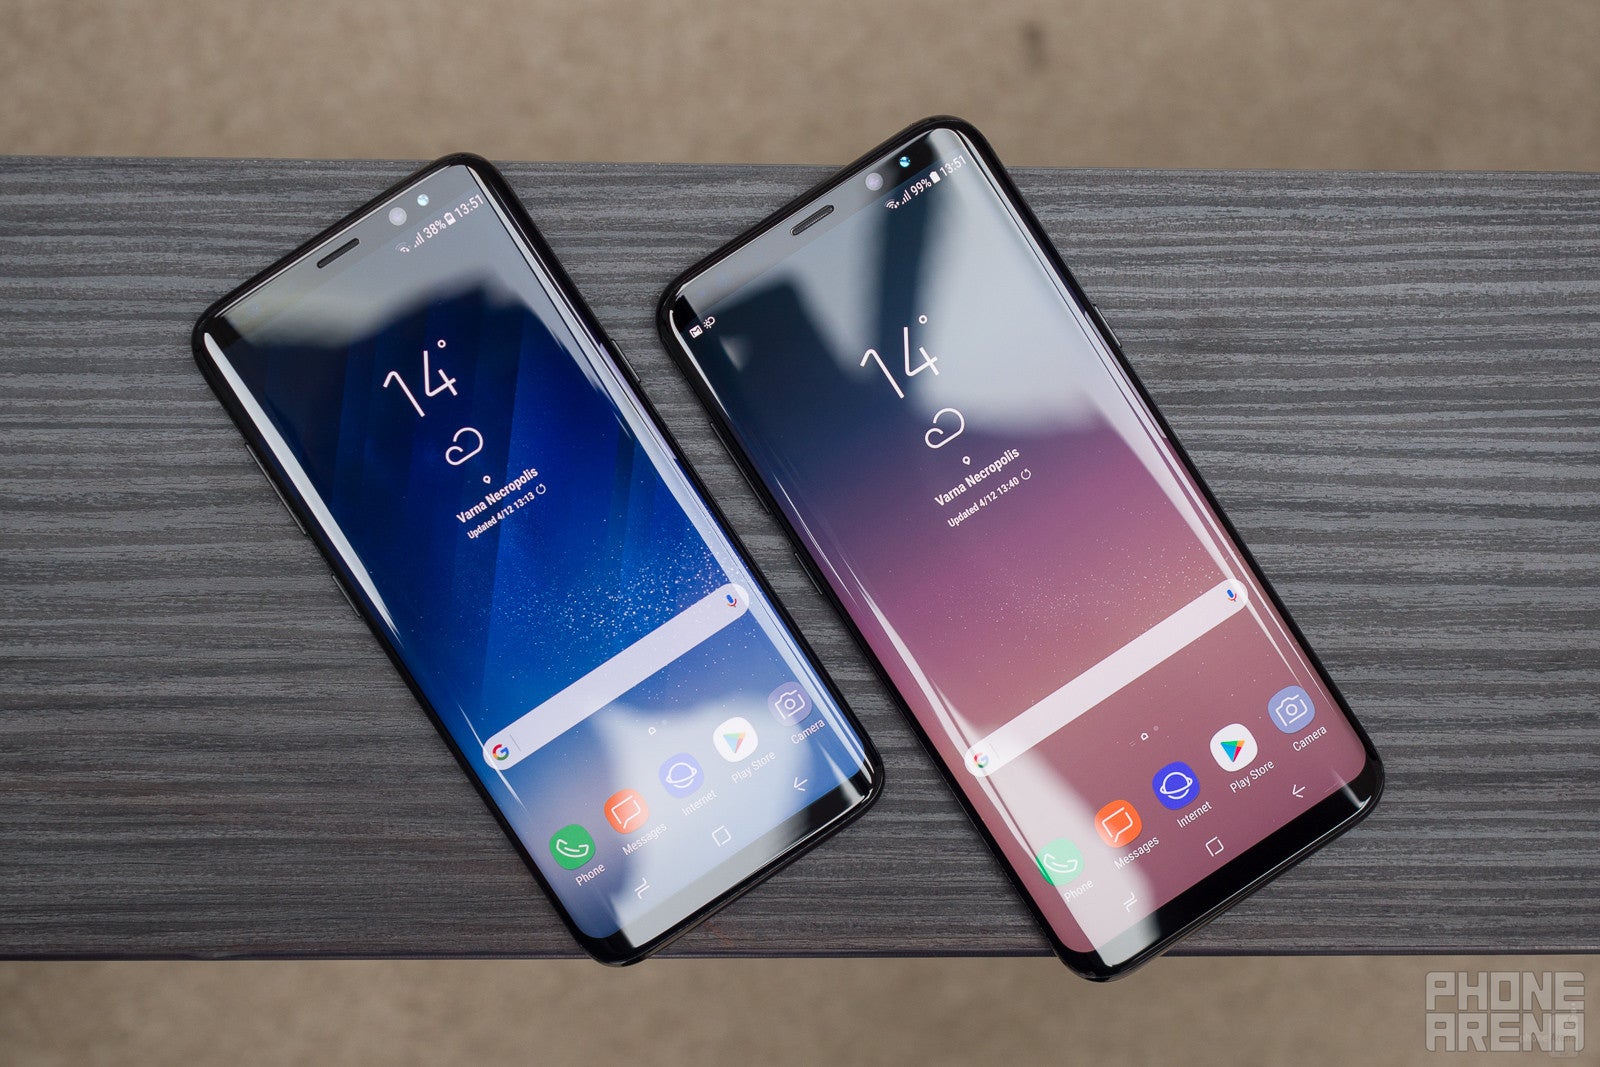 PhoneArena authors&#039; personal thoughts on the Samsung Galaxy S8 and S8+